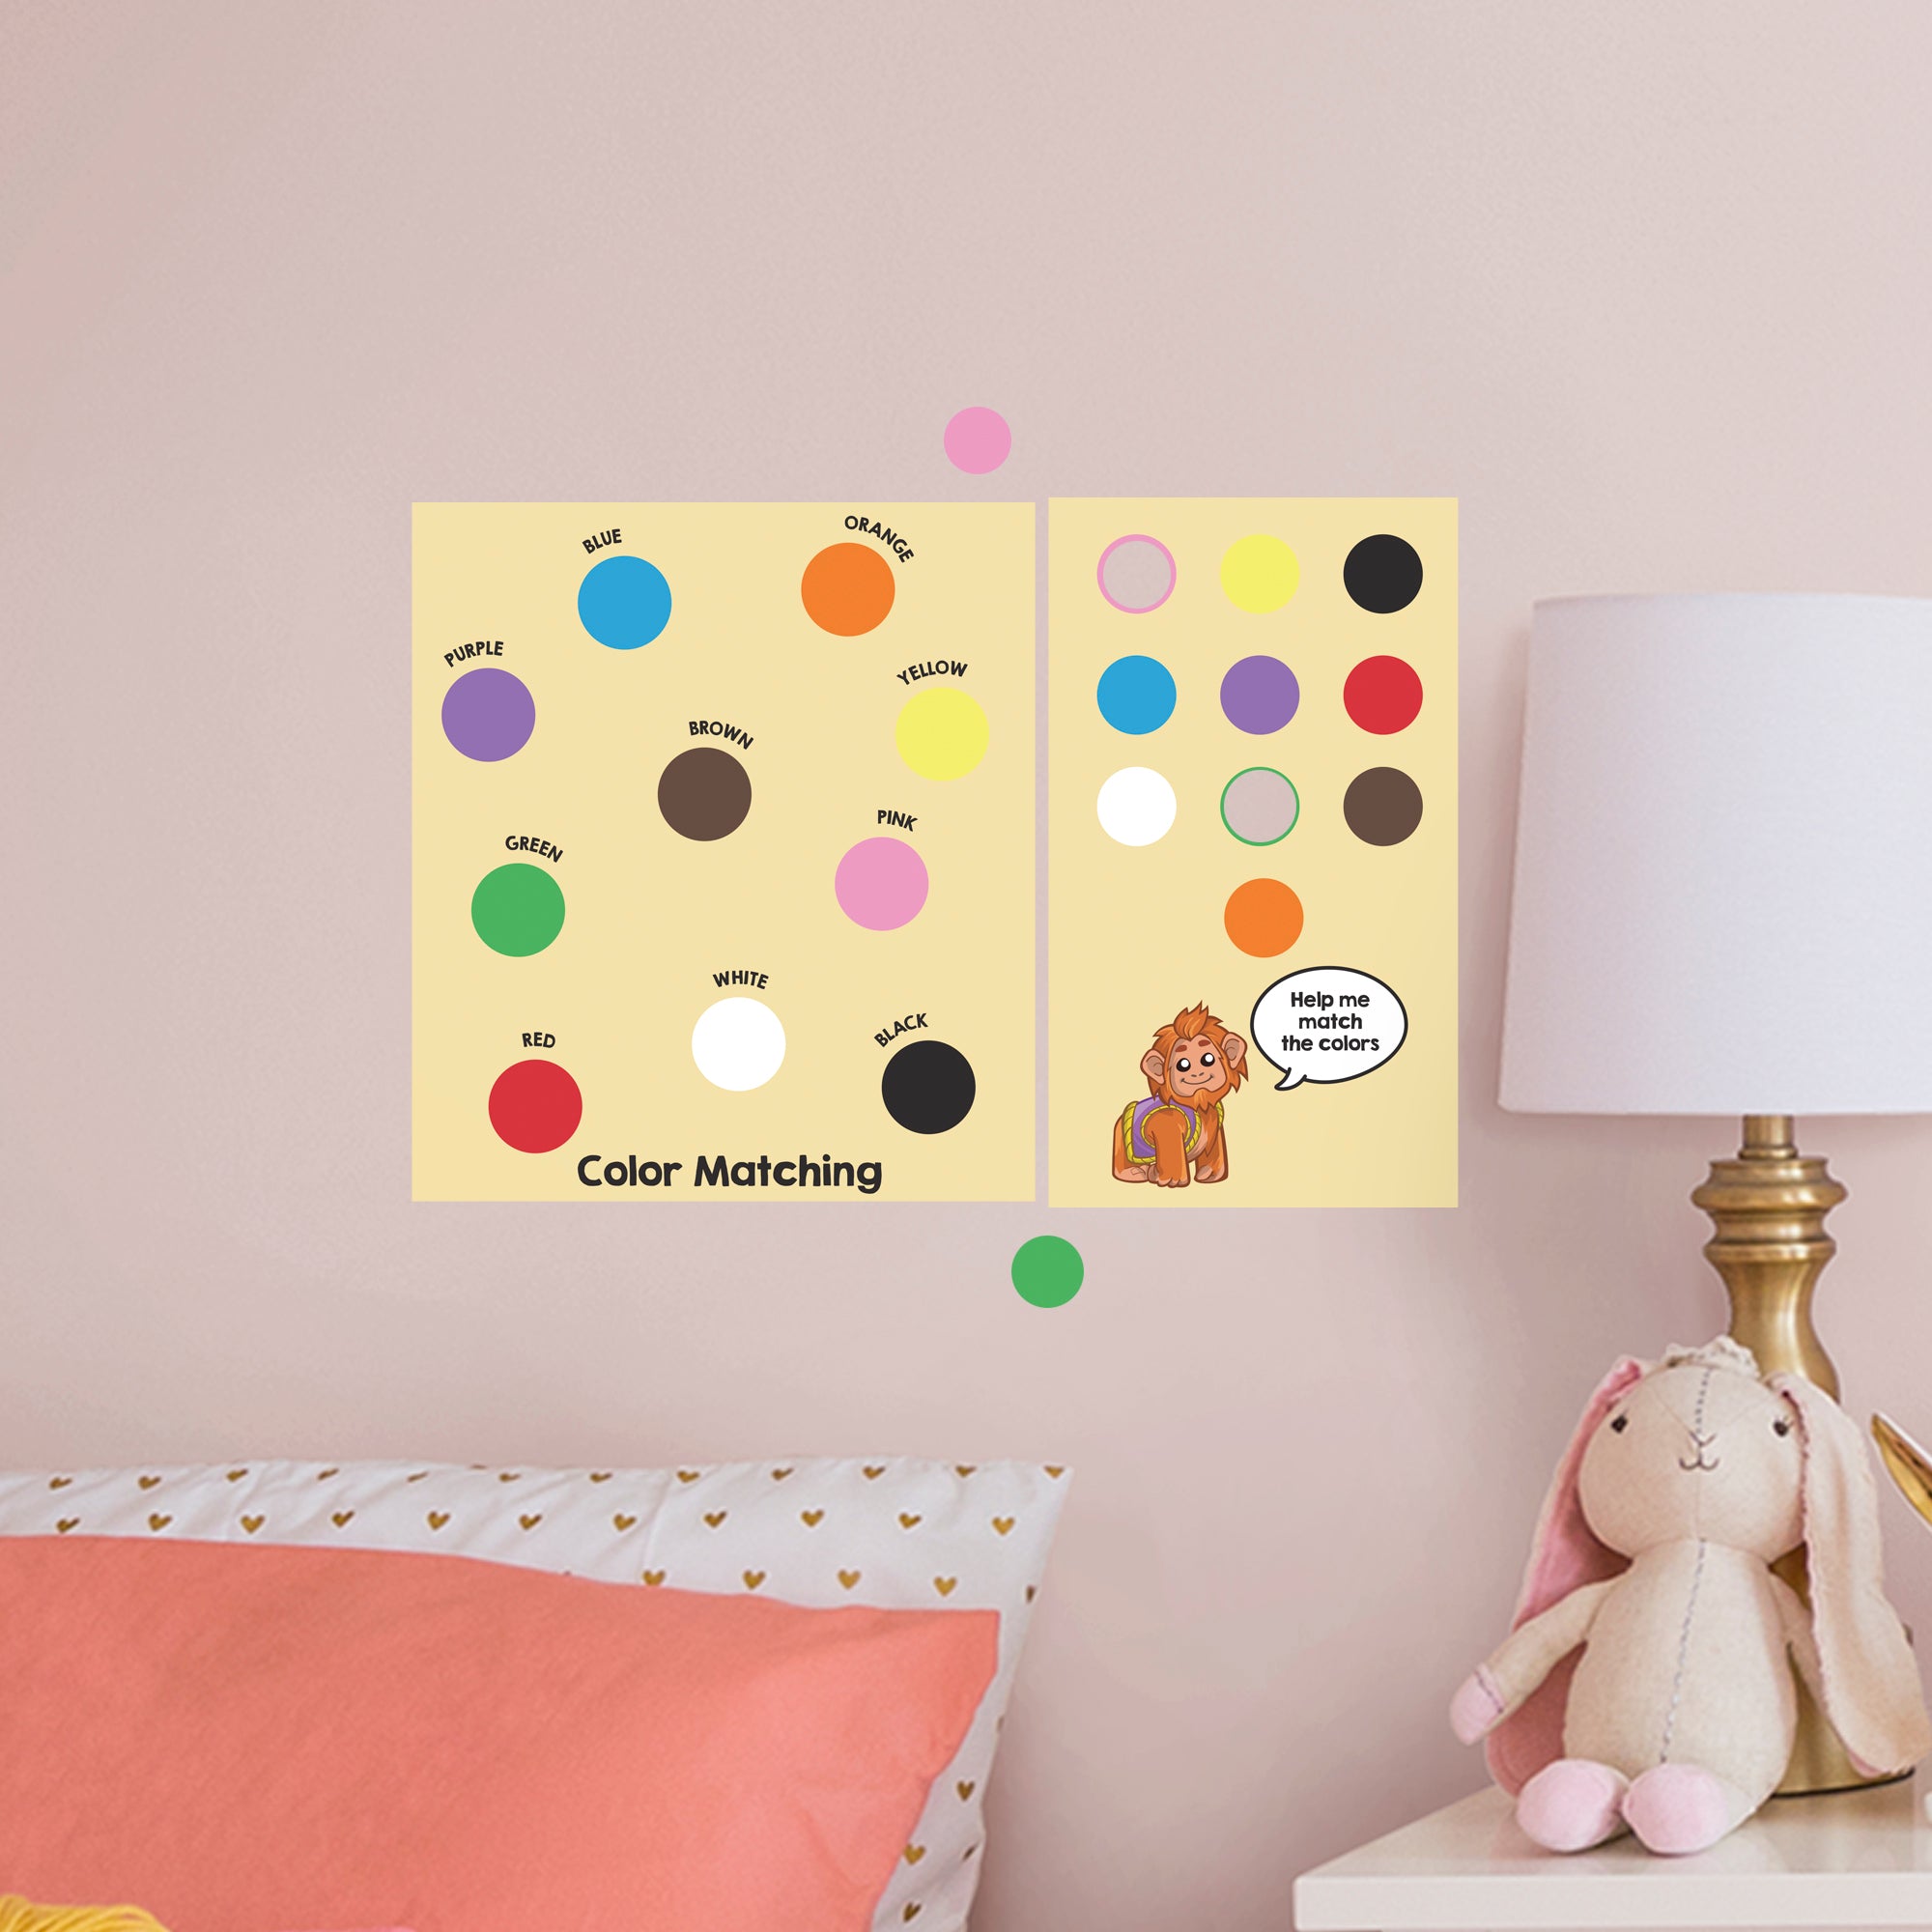 Dry Erase Educational Color Matching - Removable Wall Decal Large by Fathead | Vinyl